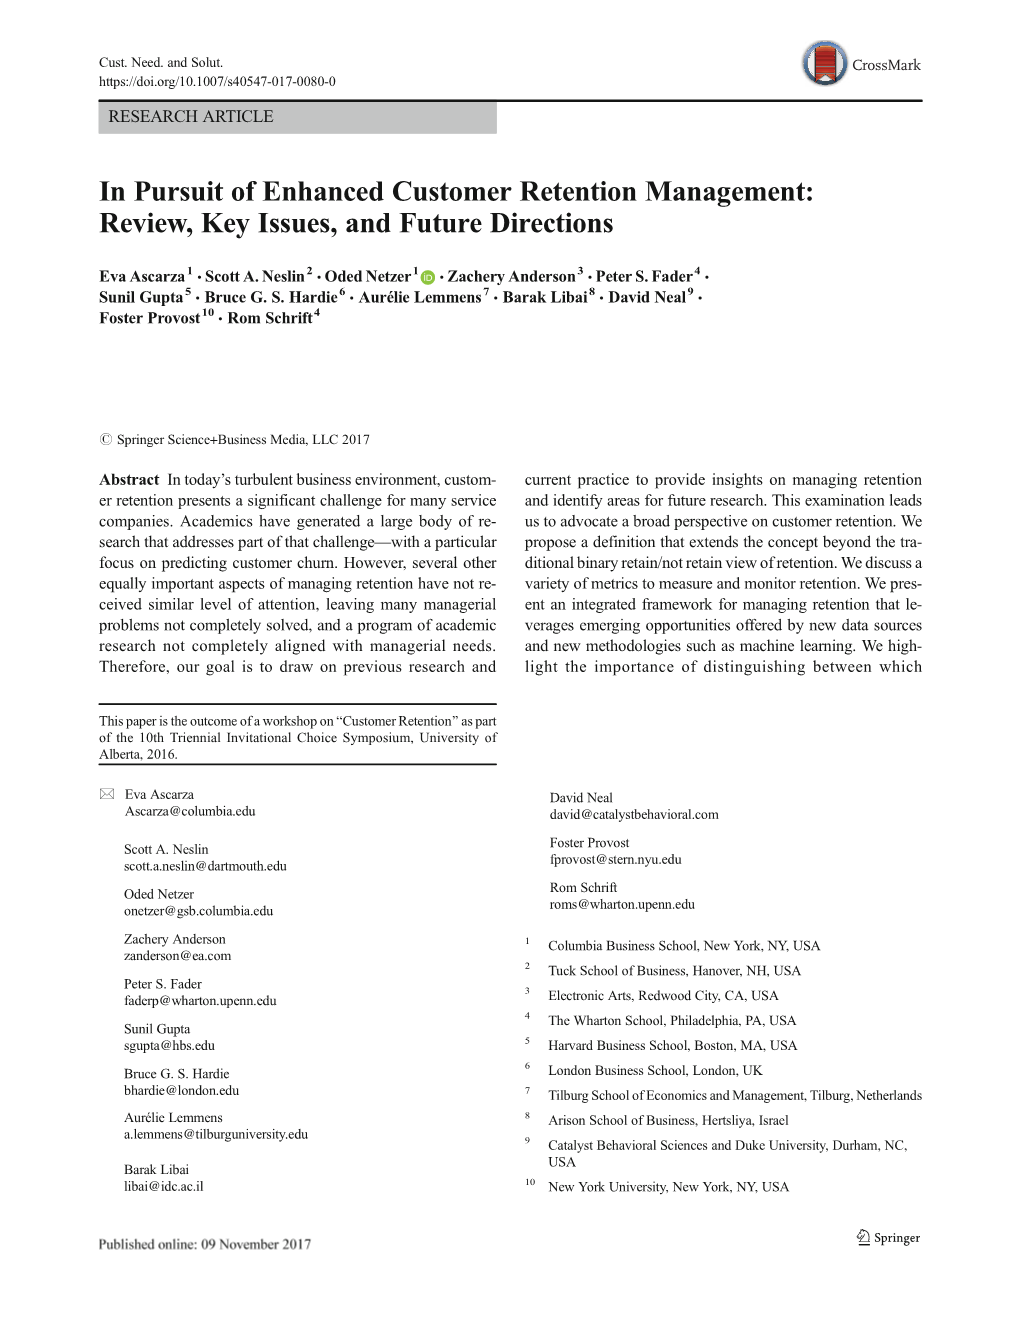 In Pursuit of Enhanced Customer Retention Management: Review, Key Issues, and Future Directions